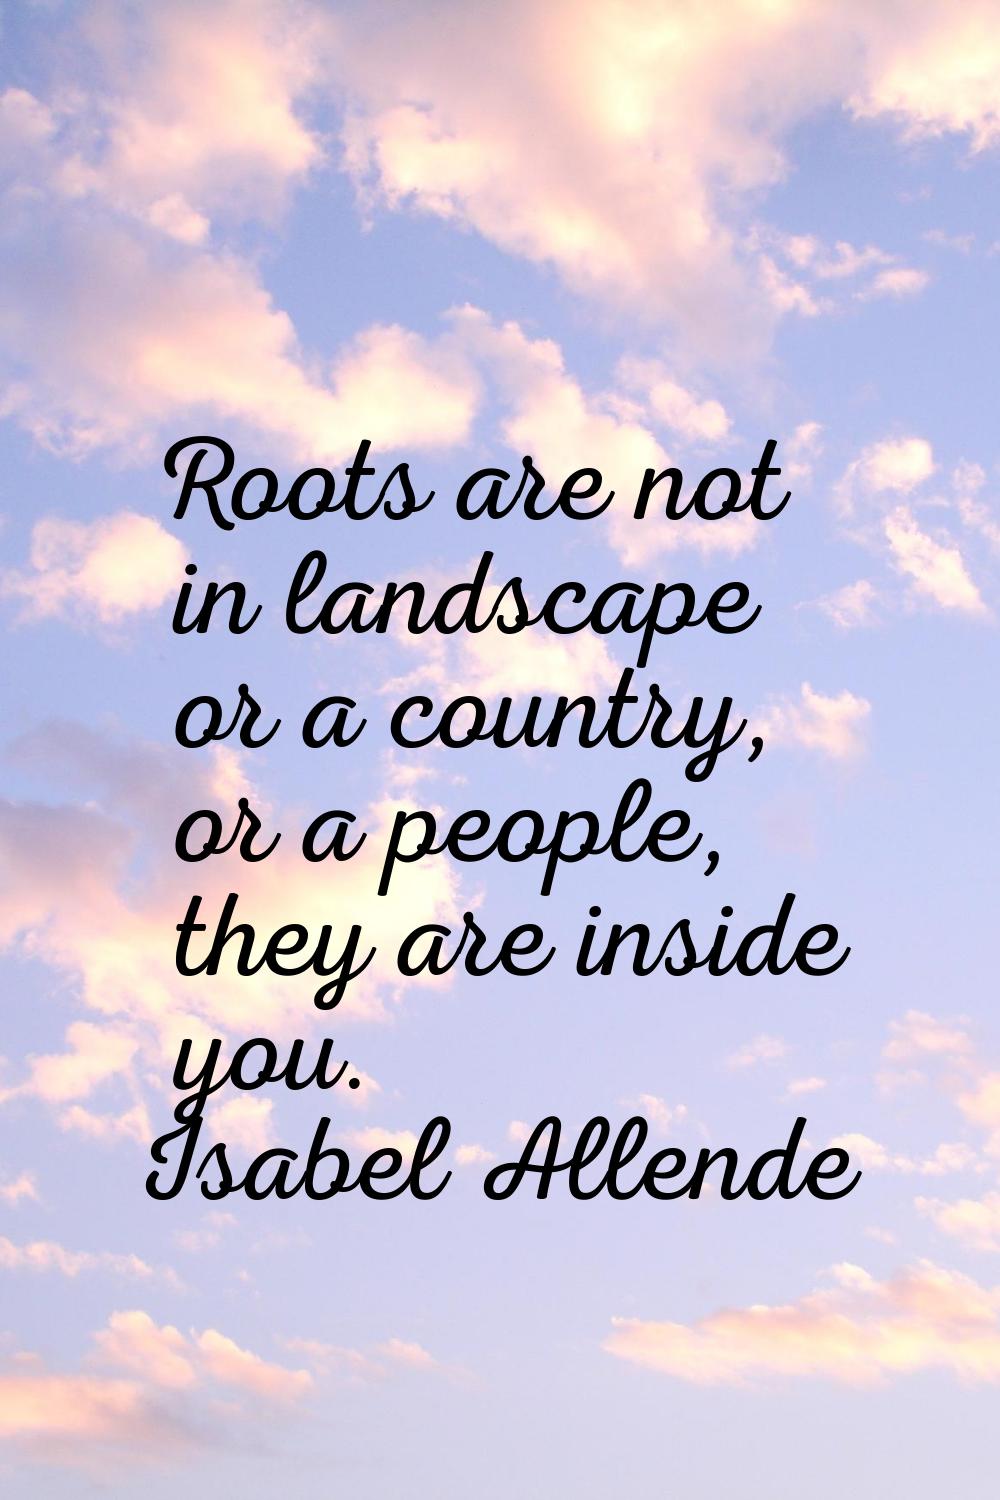 Roots are not in landscape or a country, or a people, they are inside you.